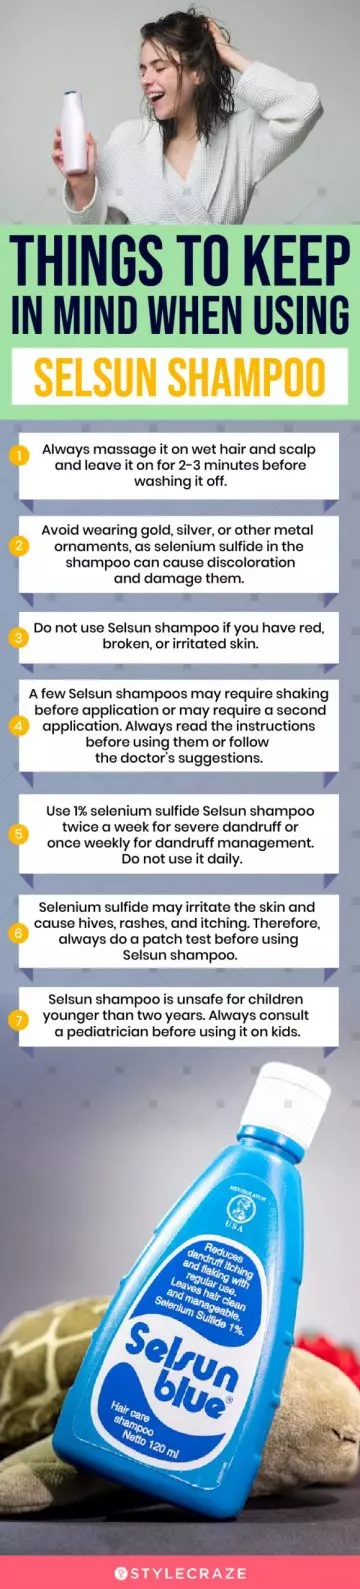 things to keep in mind when using selsun shampoo (infographic)